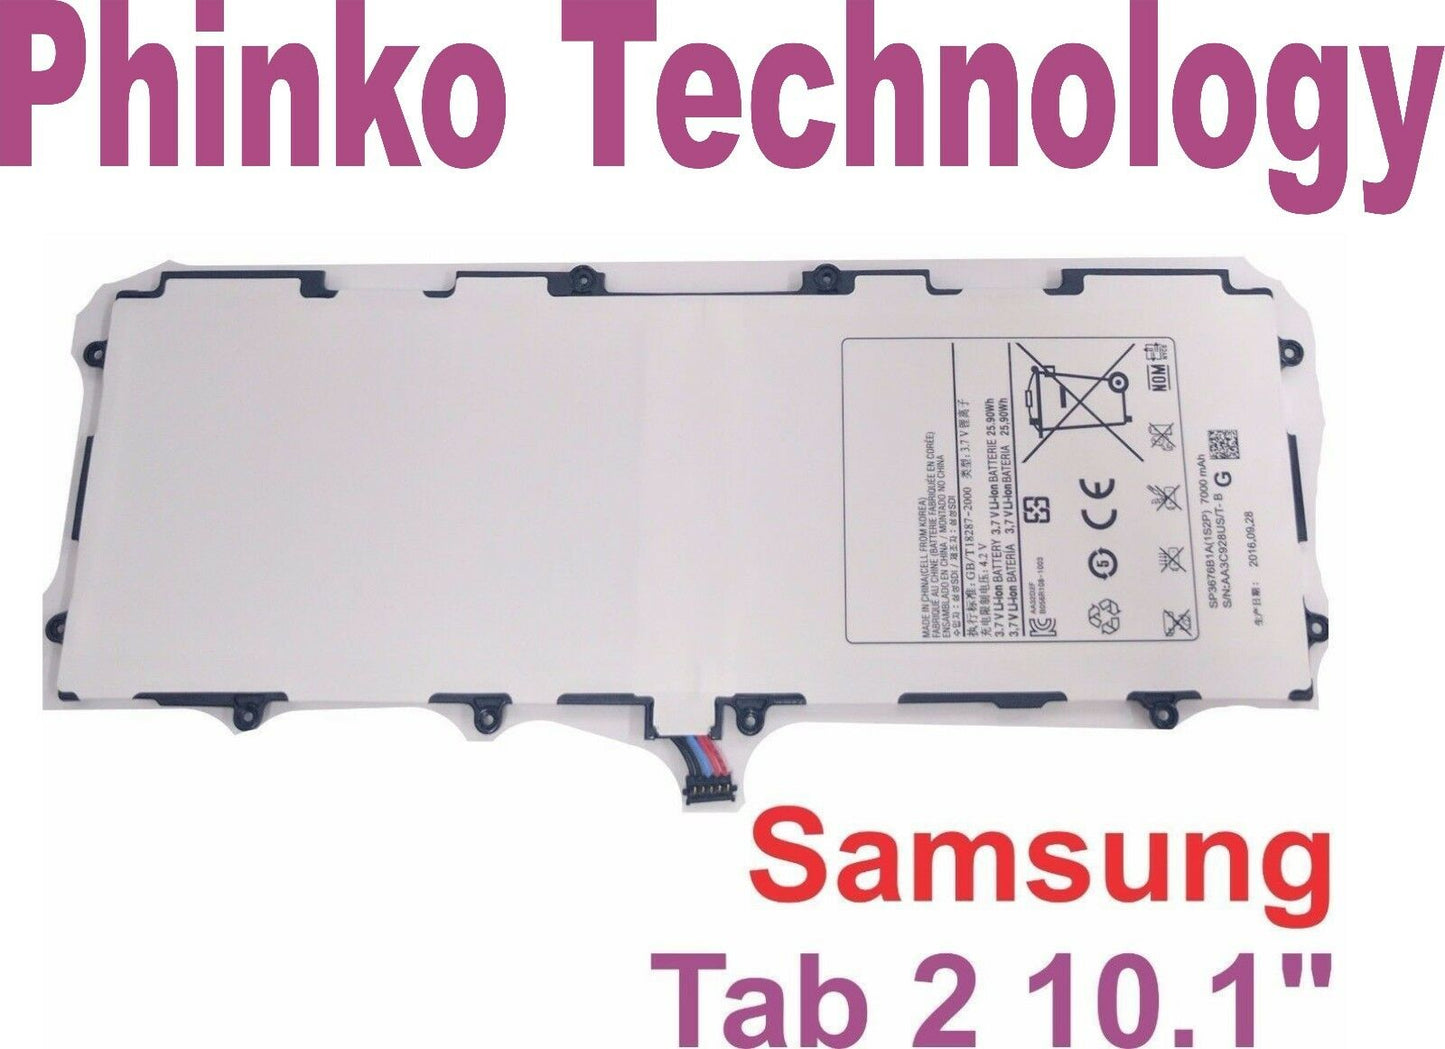 Aftermarket Battery for Samsung Galaxy Tab 2 10.1 GT P5110 P7500 P7510 SP3676B1A